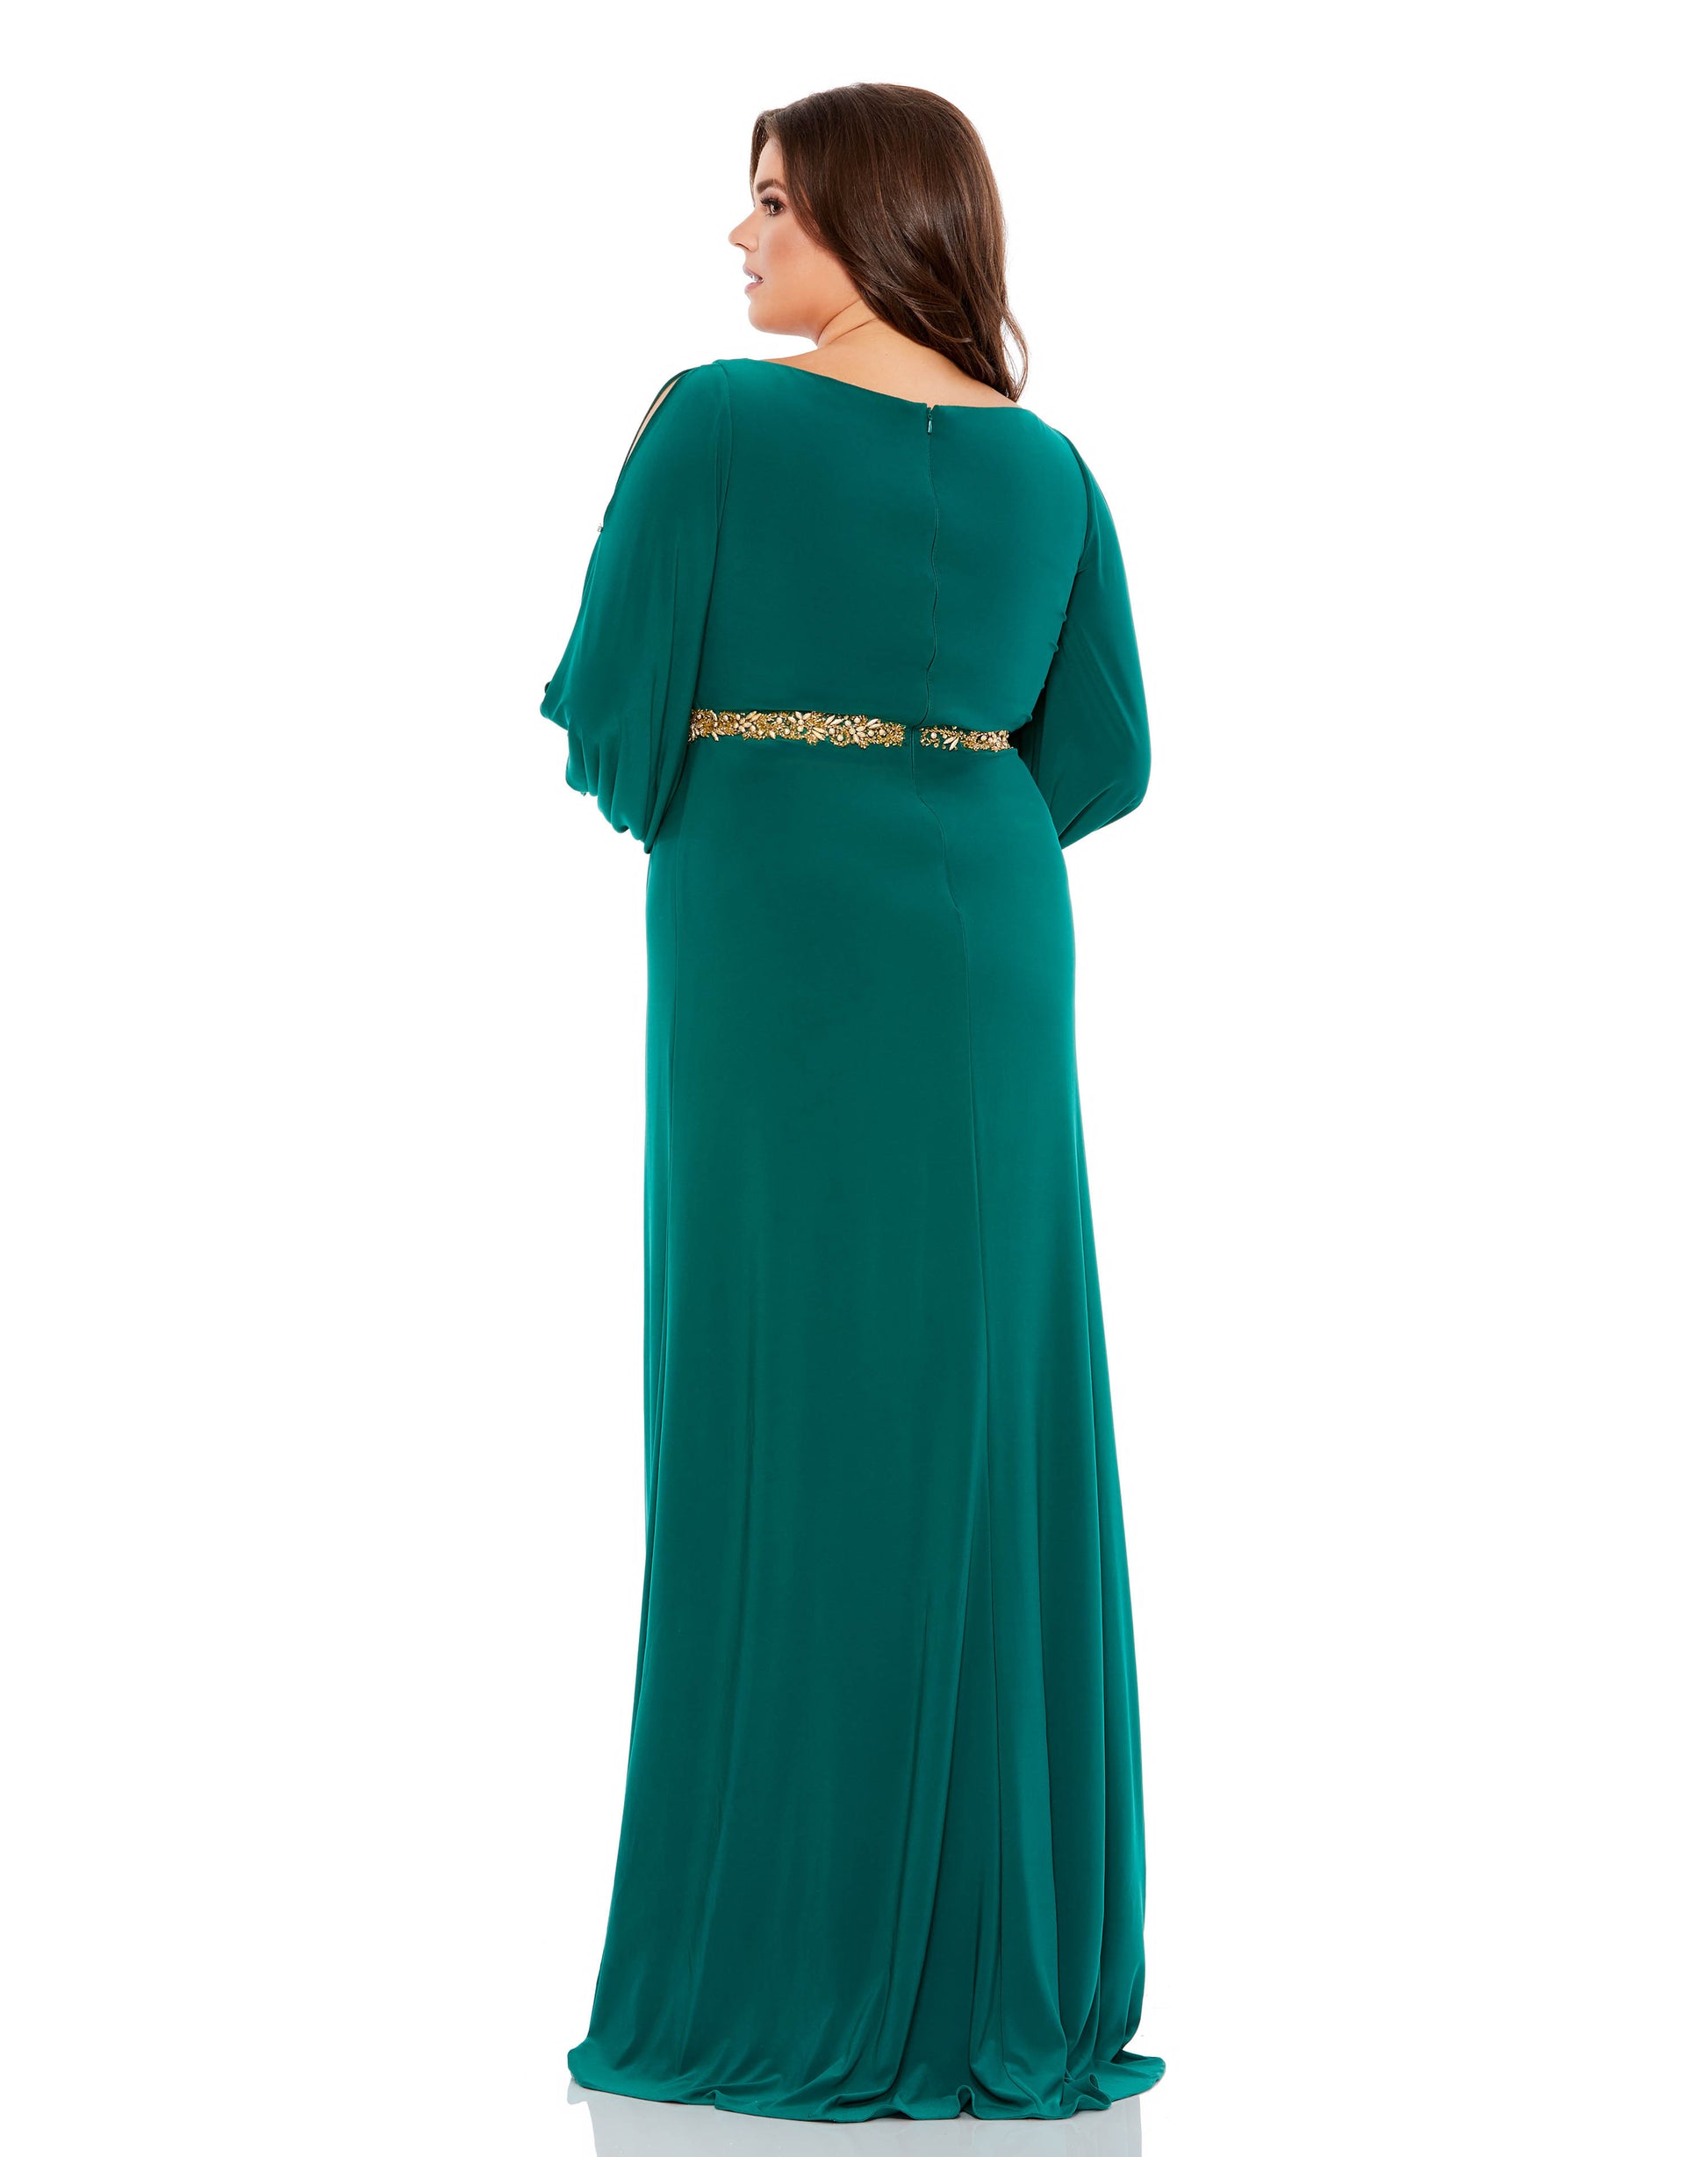 Elegant floor-length gown with a faux-wrap v-neckline, gathered waist, long split sleeves, and a thigh-high slit. A hand-embellished belt defines the natural waist. Mac Duggal 100% Polyester Back Zipper Long Sleeves V-Neck Full Length Style #67747